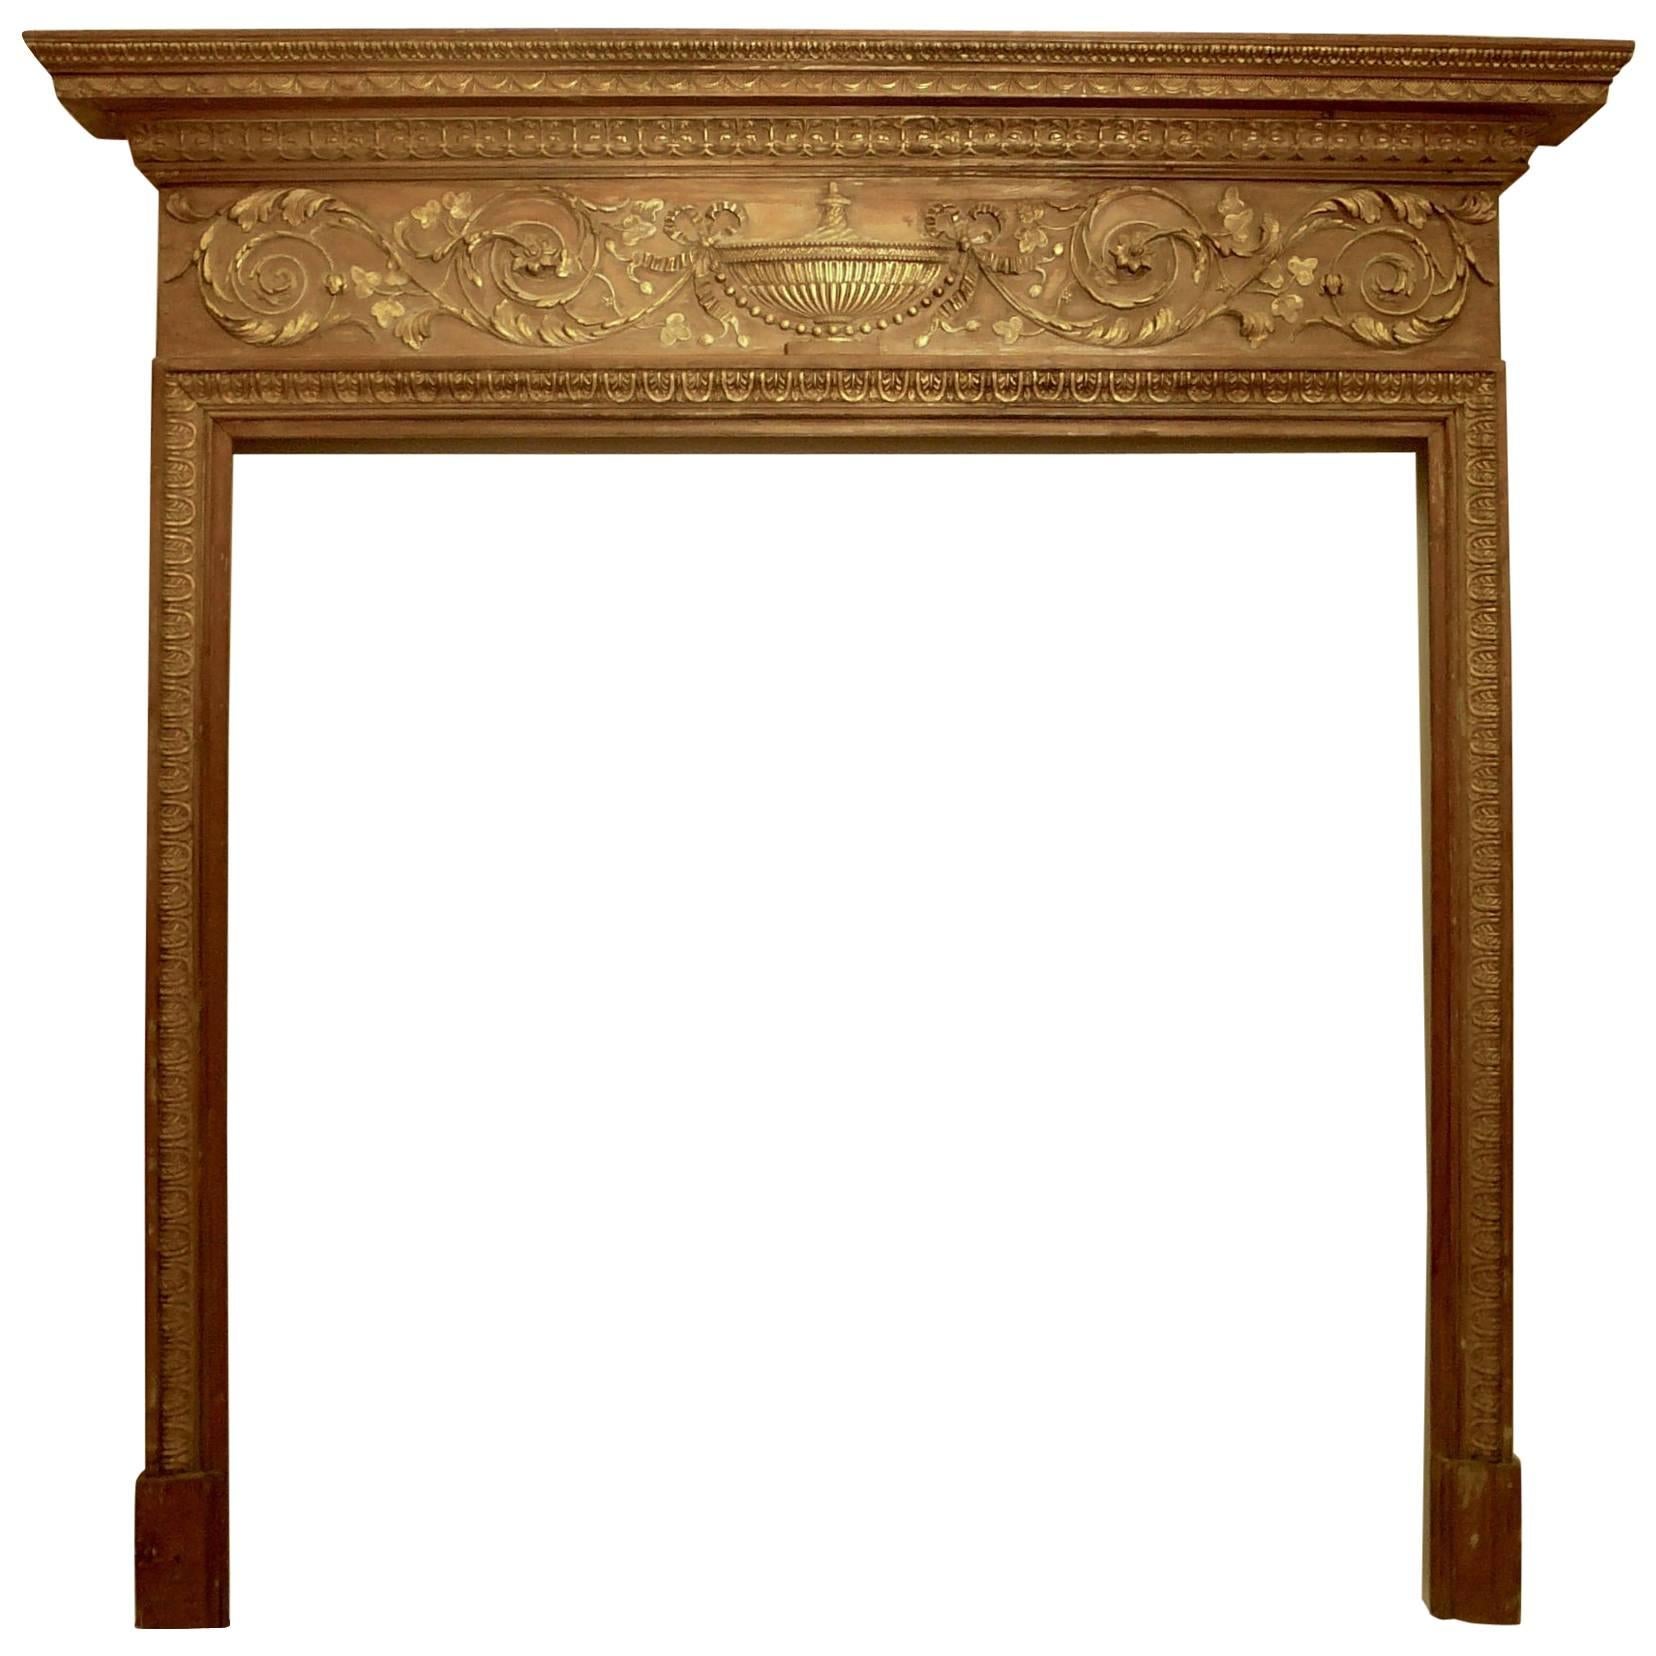 English Georgian Carved Pine Fireplace Mantle with Gilt Elements